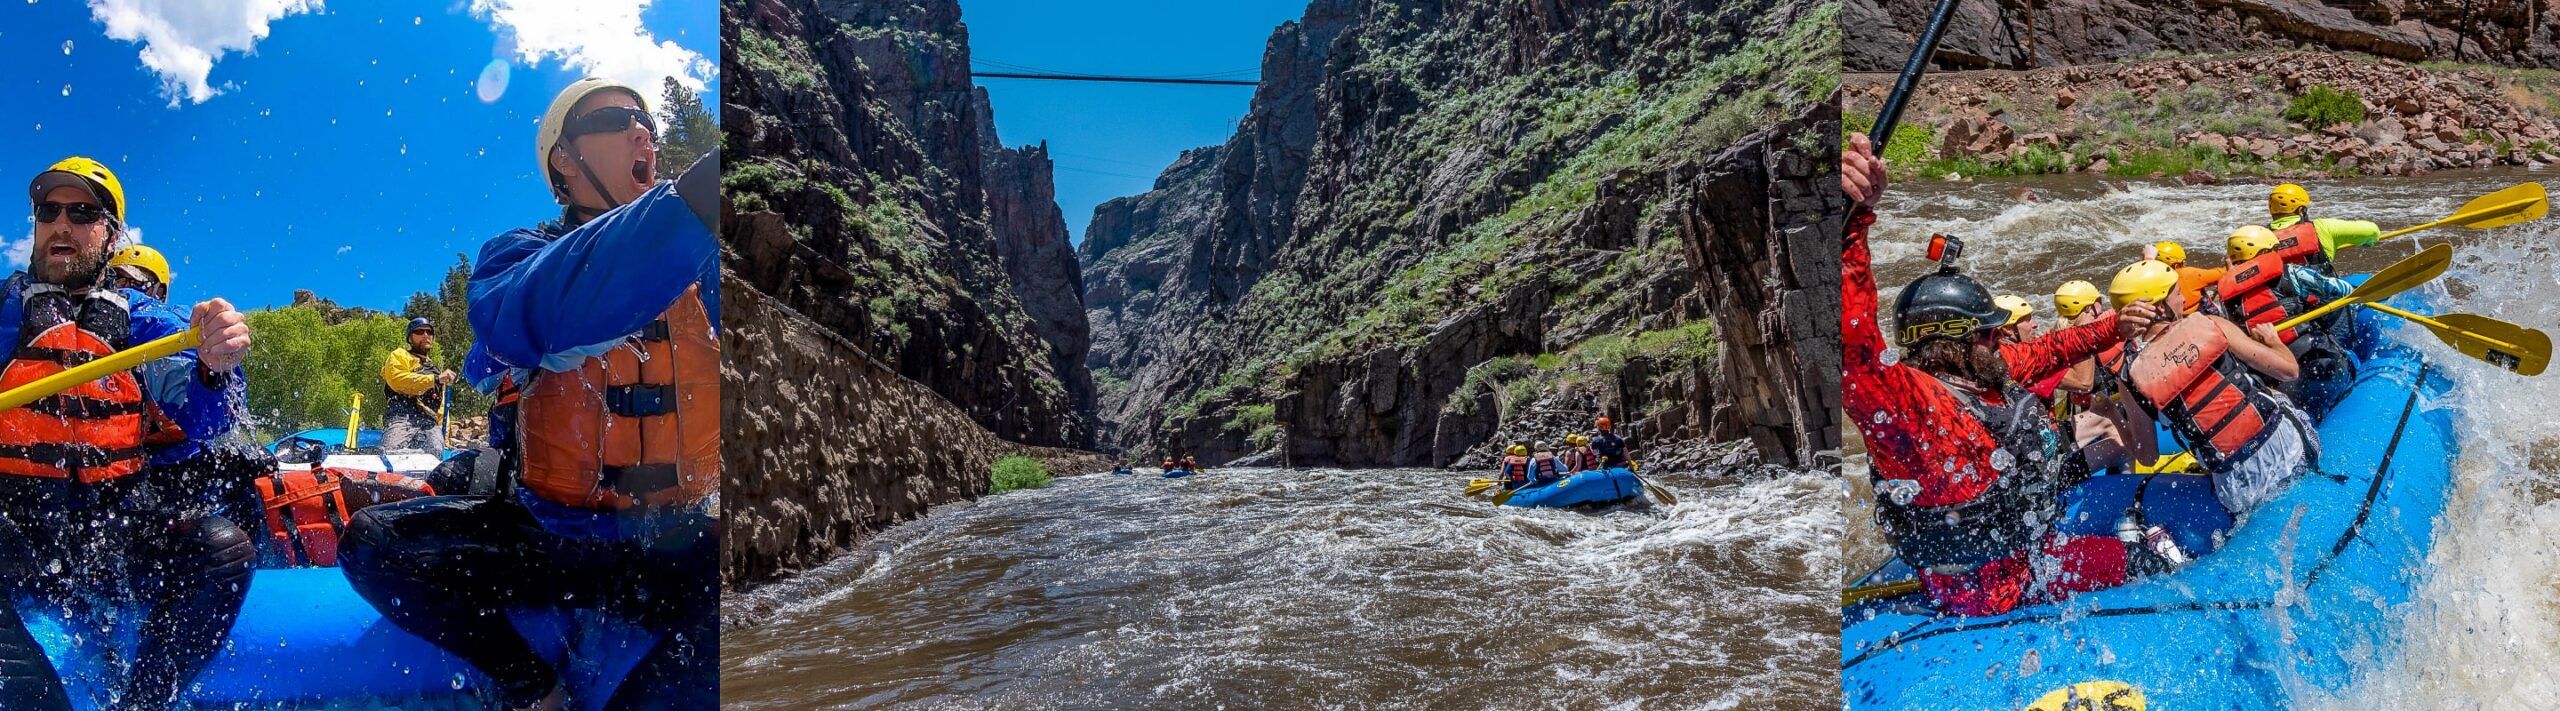 Three images side-by-side of Royal Gorge Whitewater Rafting in Colorado